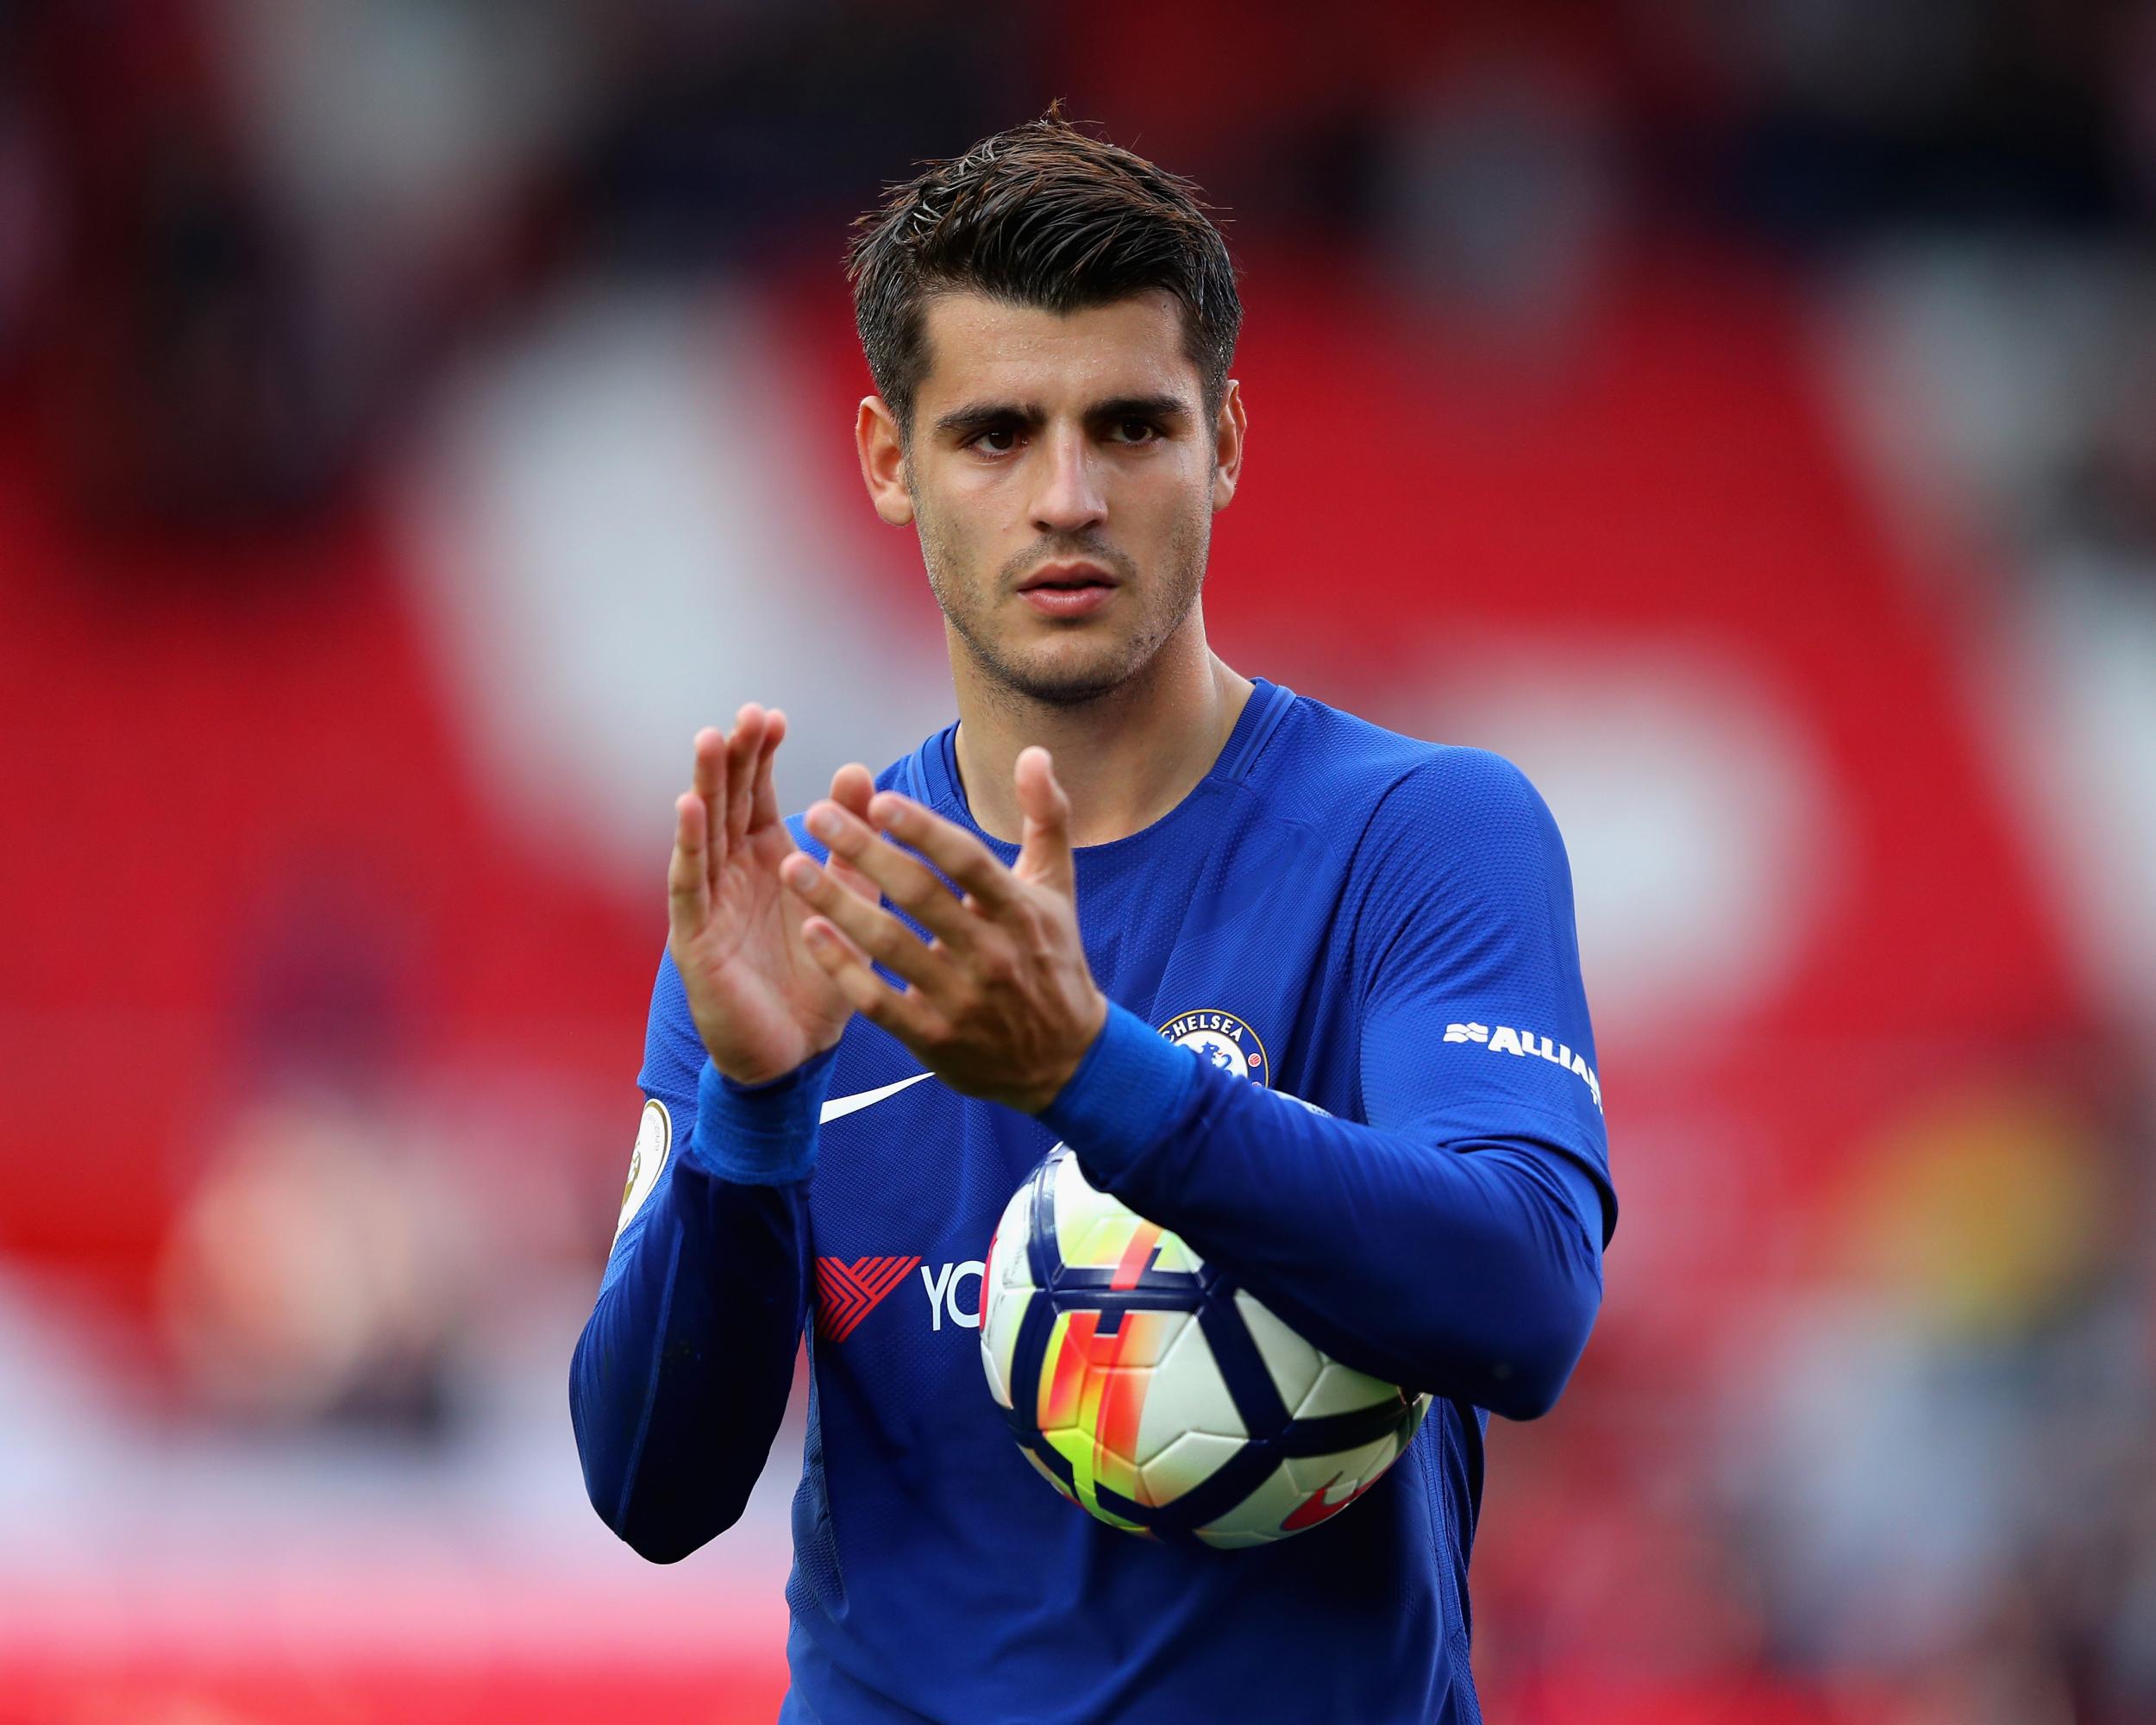 Alvaro Morata kept the match ball after netting a hat-trick against Stoke